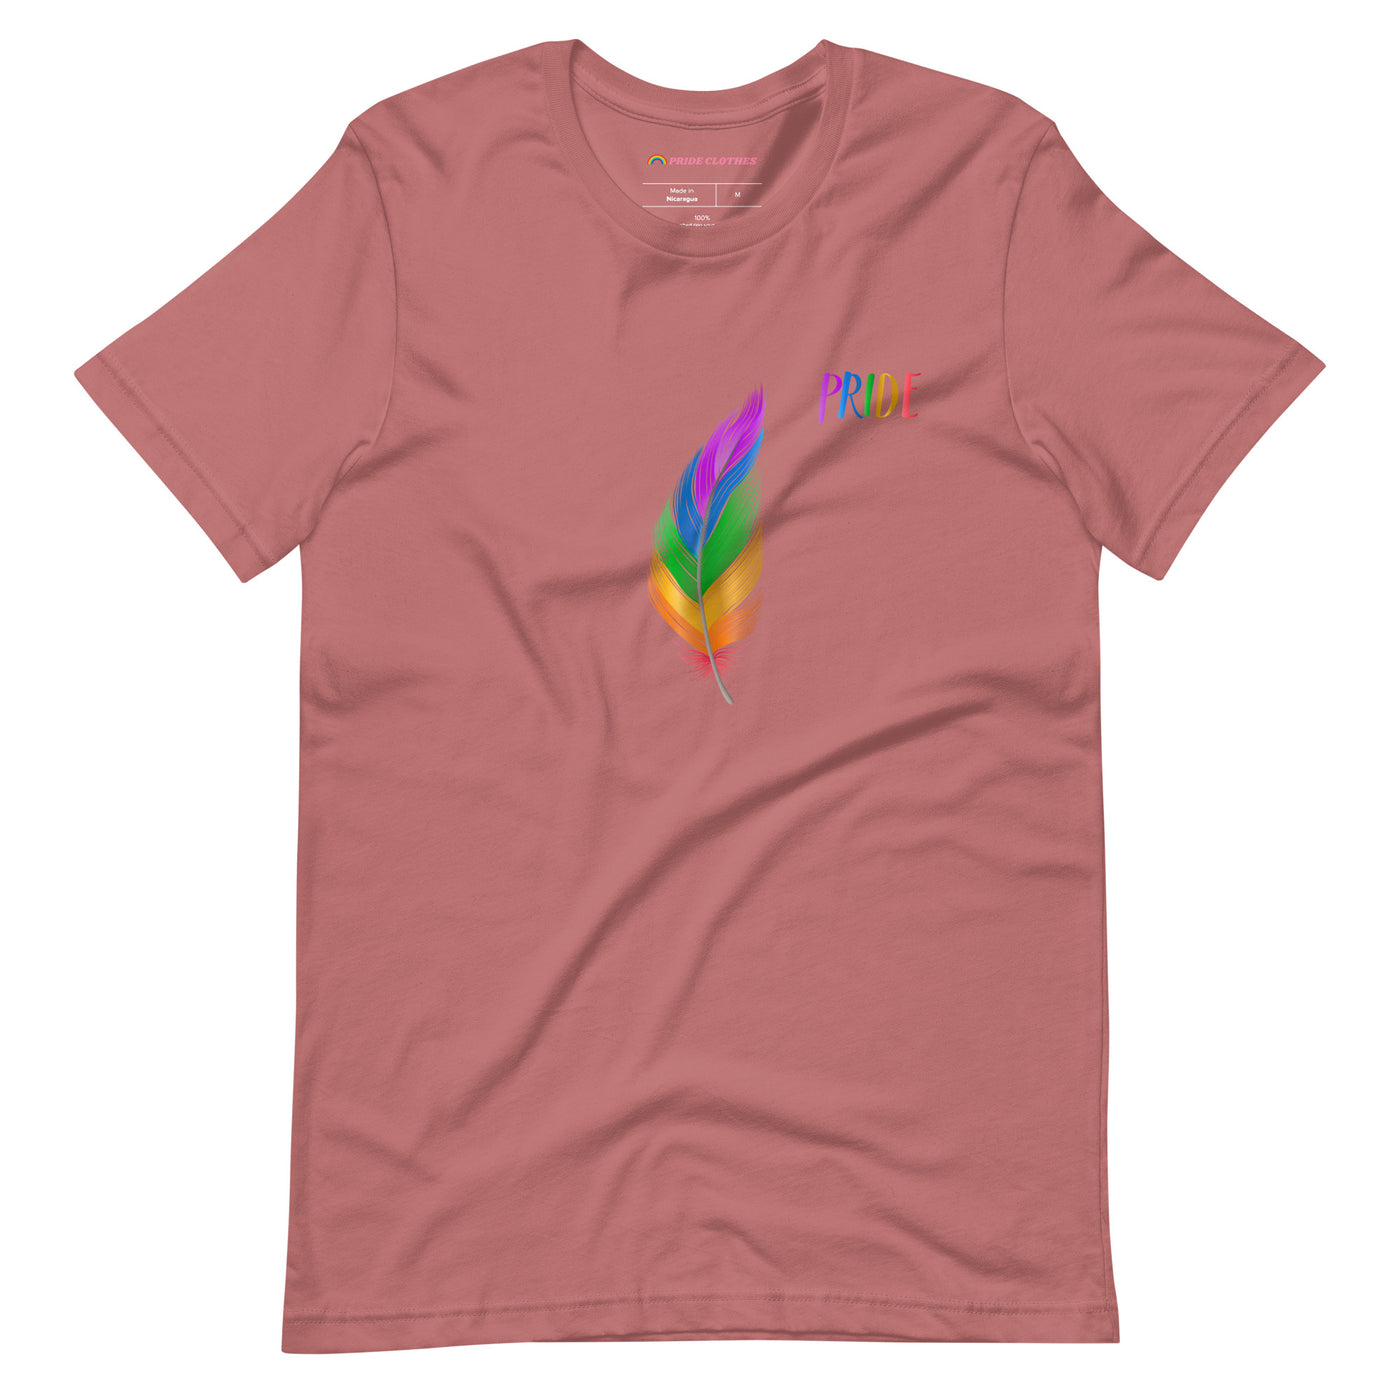 Pride Clothes - A Pride Feather Shirt That Can Make You Look and Feel Your Best - Mauve